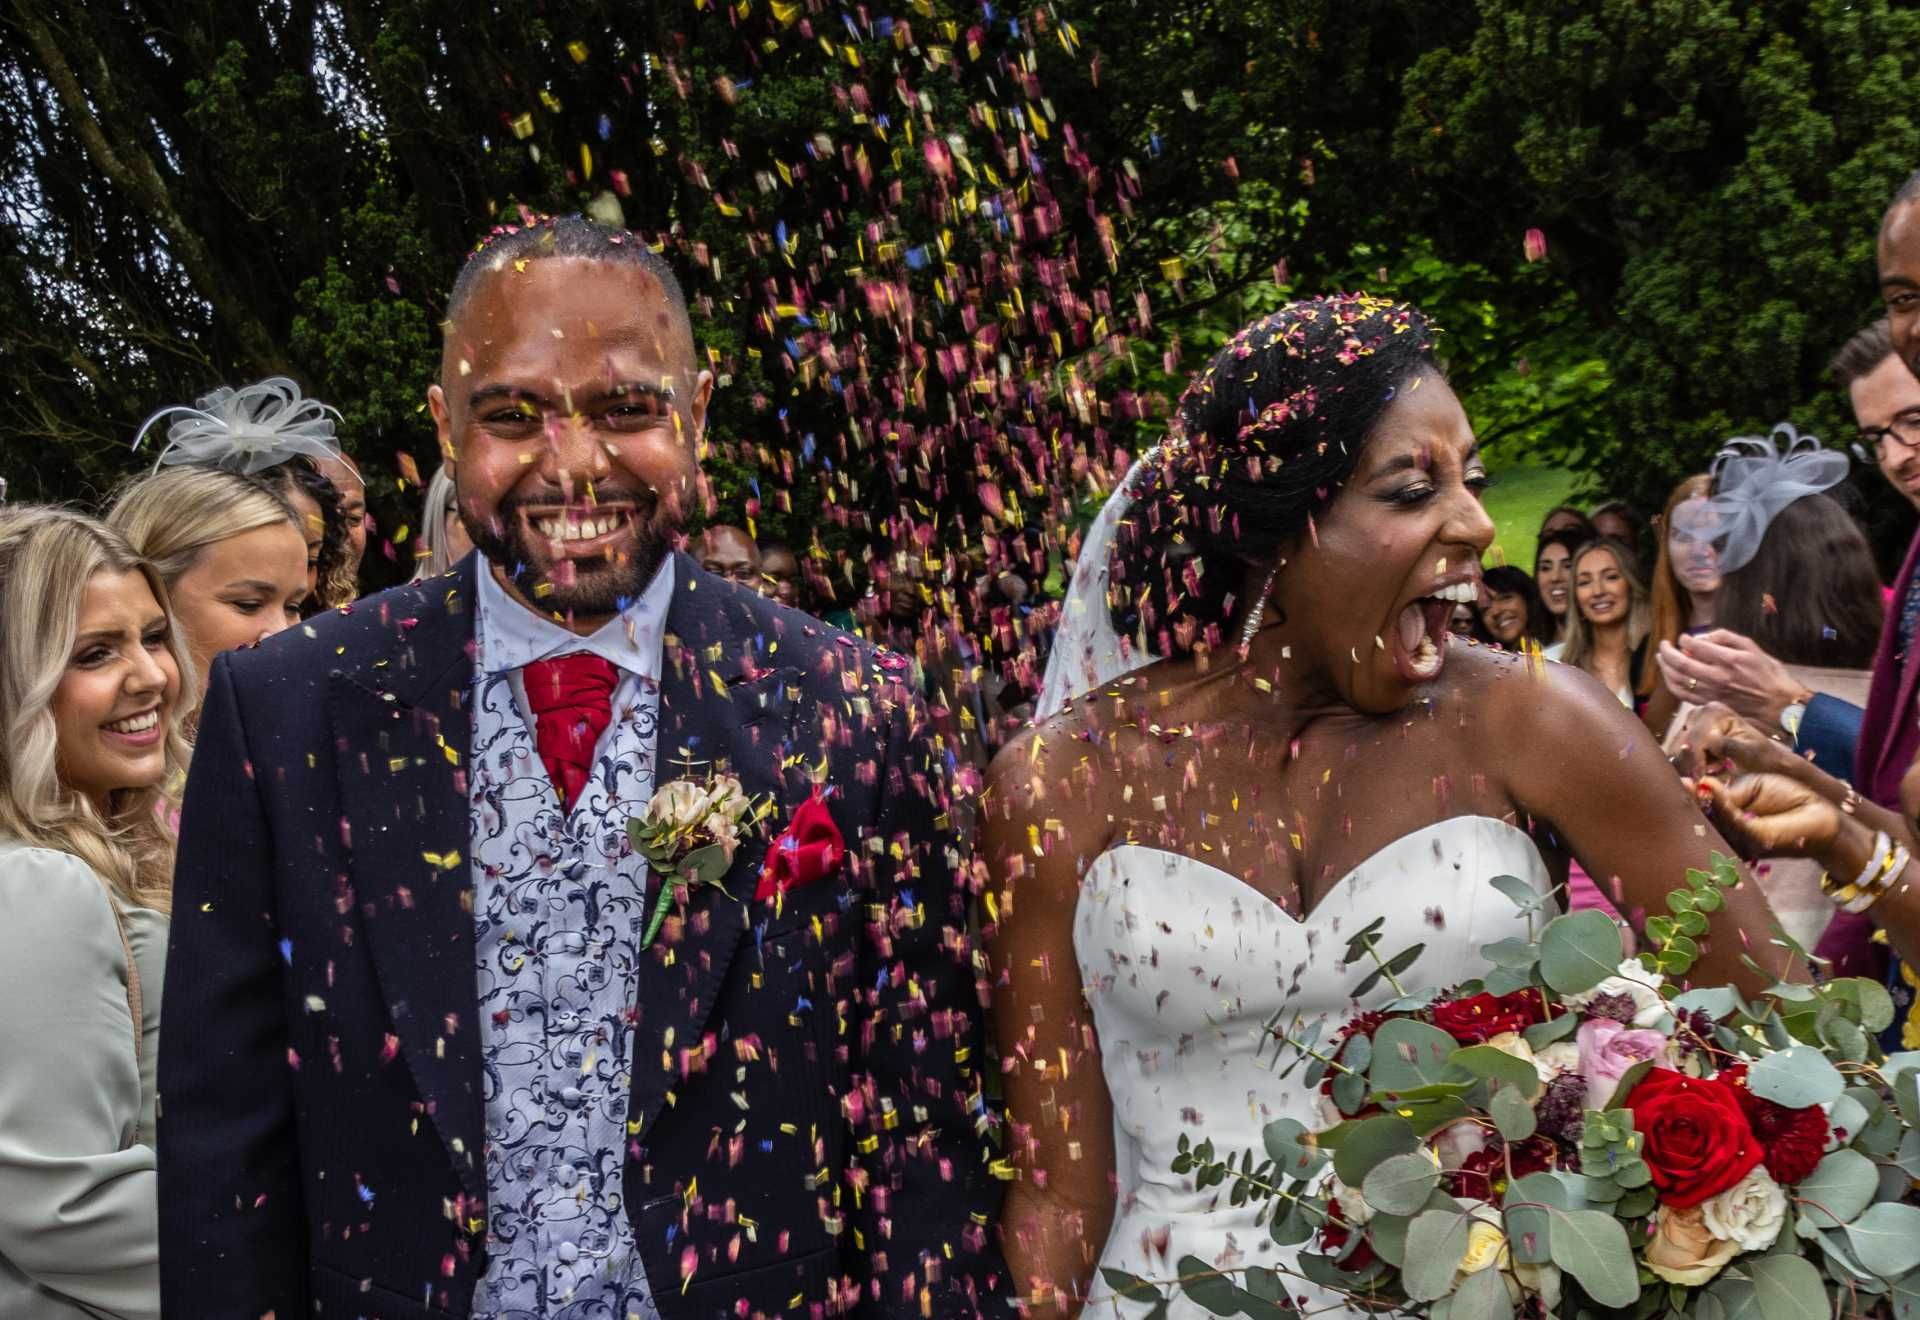 Rick Dell Photography - Award Winning Wedding Photographer in Manchester